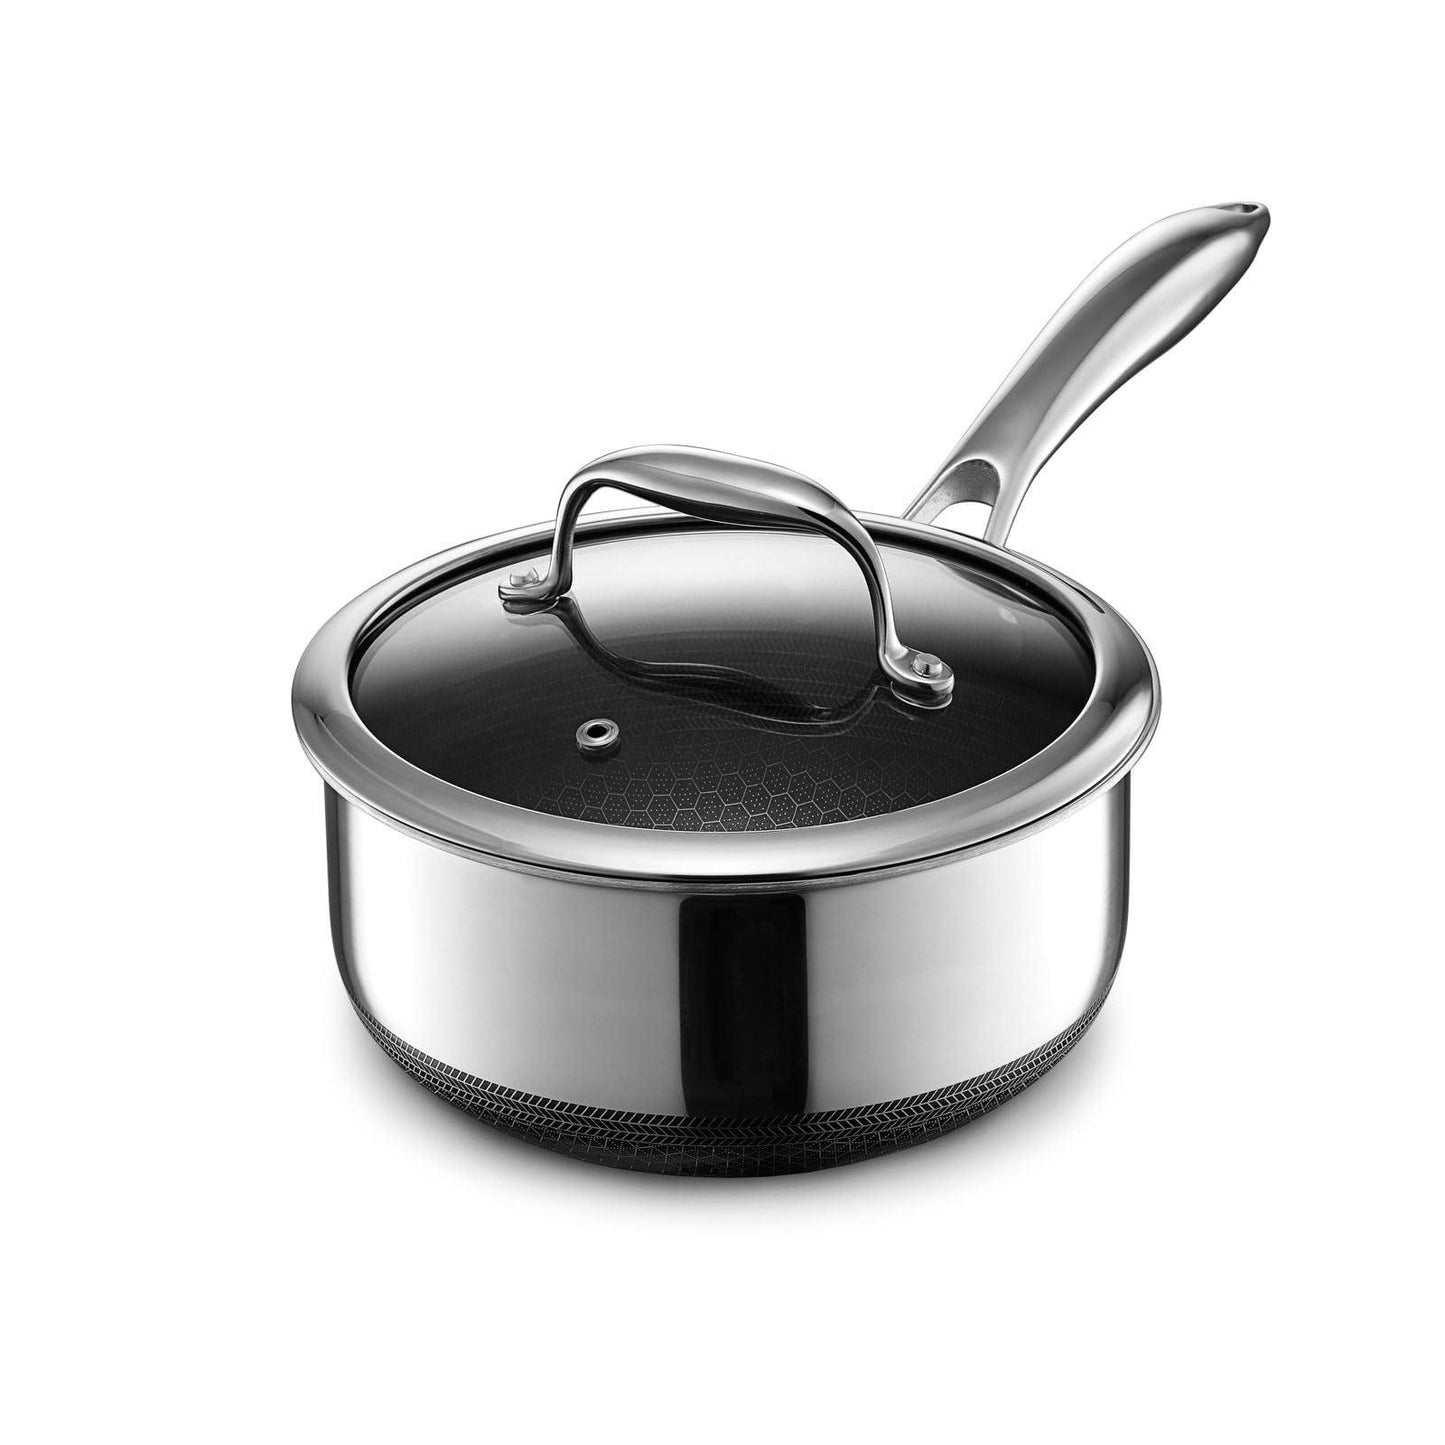 HexClad Hybrid Nonstick 1-Quart Saucepan with Tempered Glass Lid, Stay-Cool Handle, Dishwasher Safe, Induction Ready, Compatible with All Cooktops - CookCave